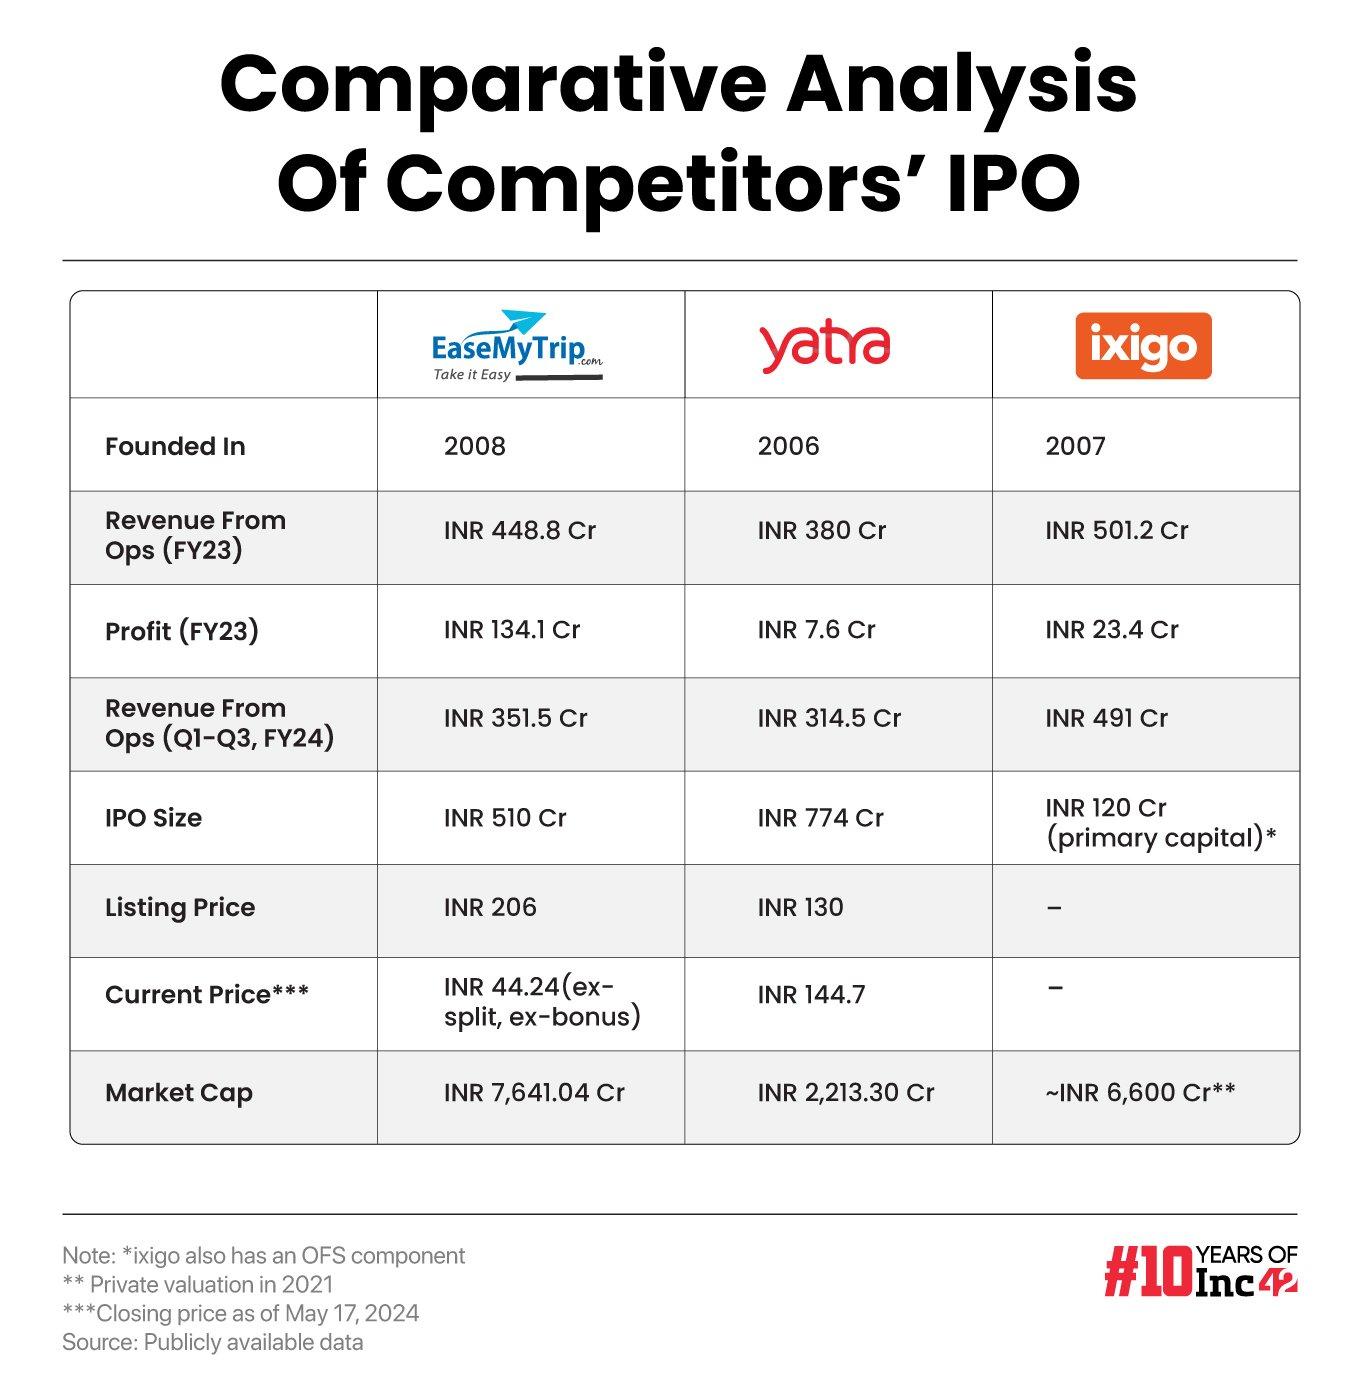 Comparative analysis of Competitors’ IPO - table